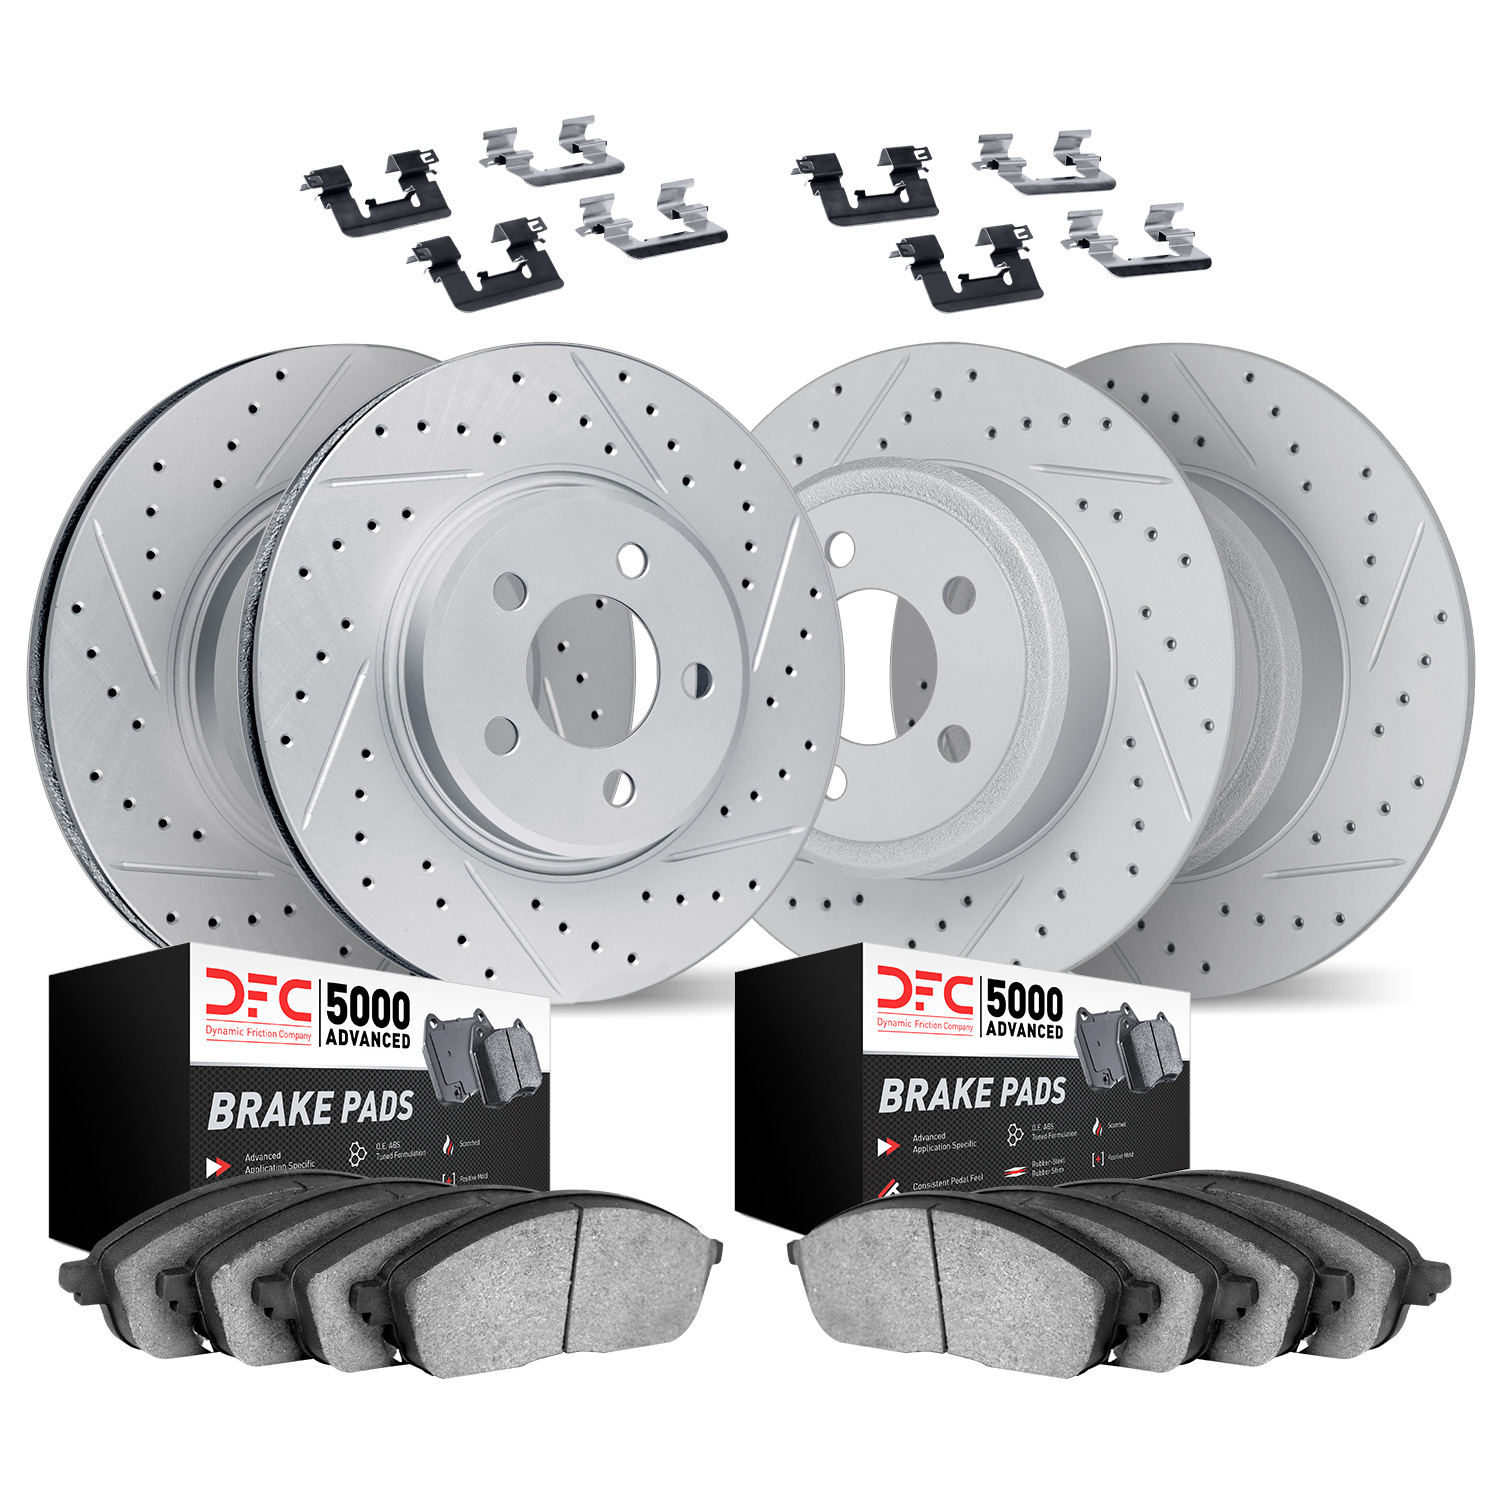 2514-07002 Geoperformance Drilled/Slotted Rotors w/5000 Advanced Brake Pads Kit & Hardware, 2014-2019 Mopar, Position: Front and